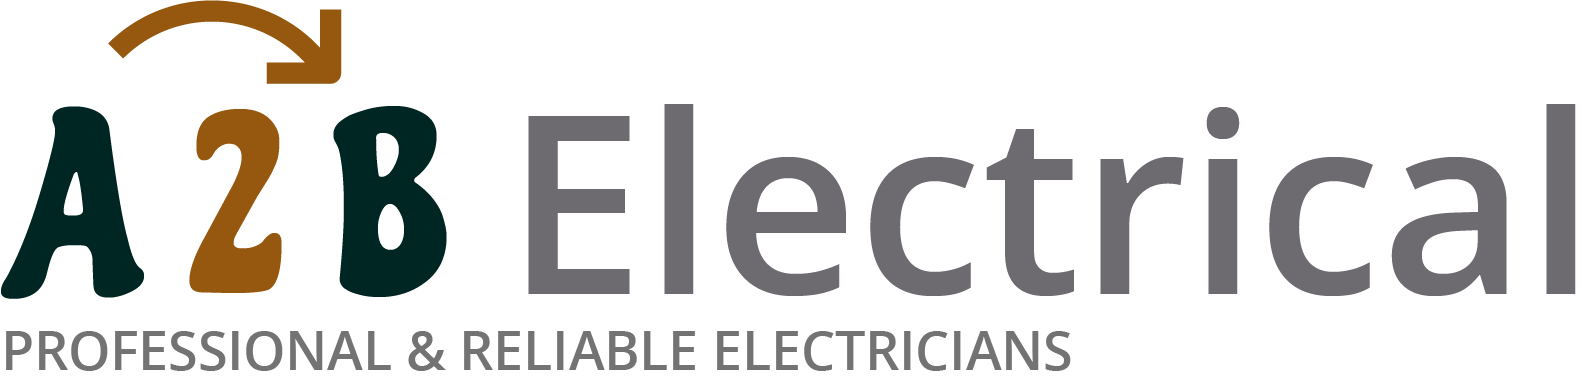 If you have electrical wiring problems in Leytonstone, we can provide an electrician to have a look for you. 